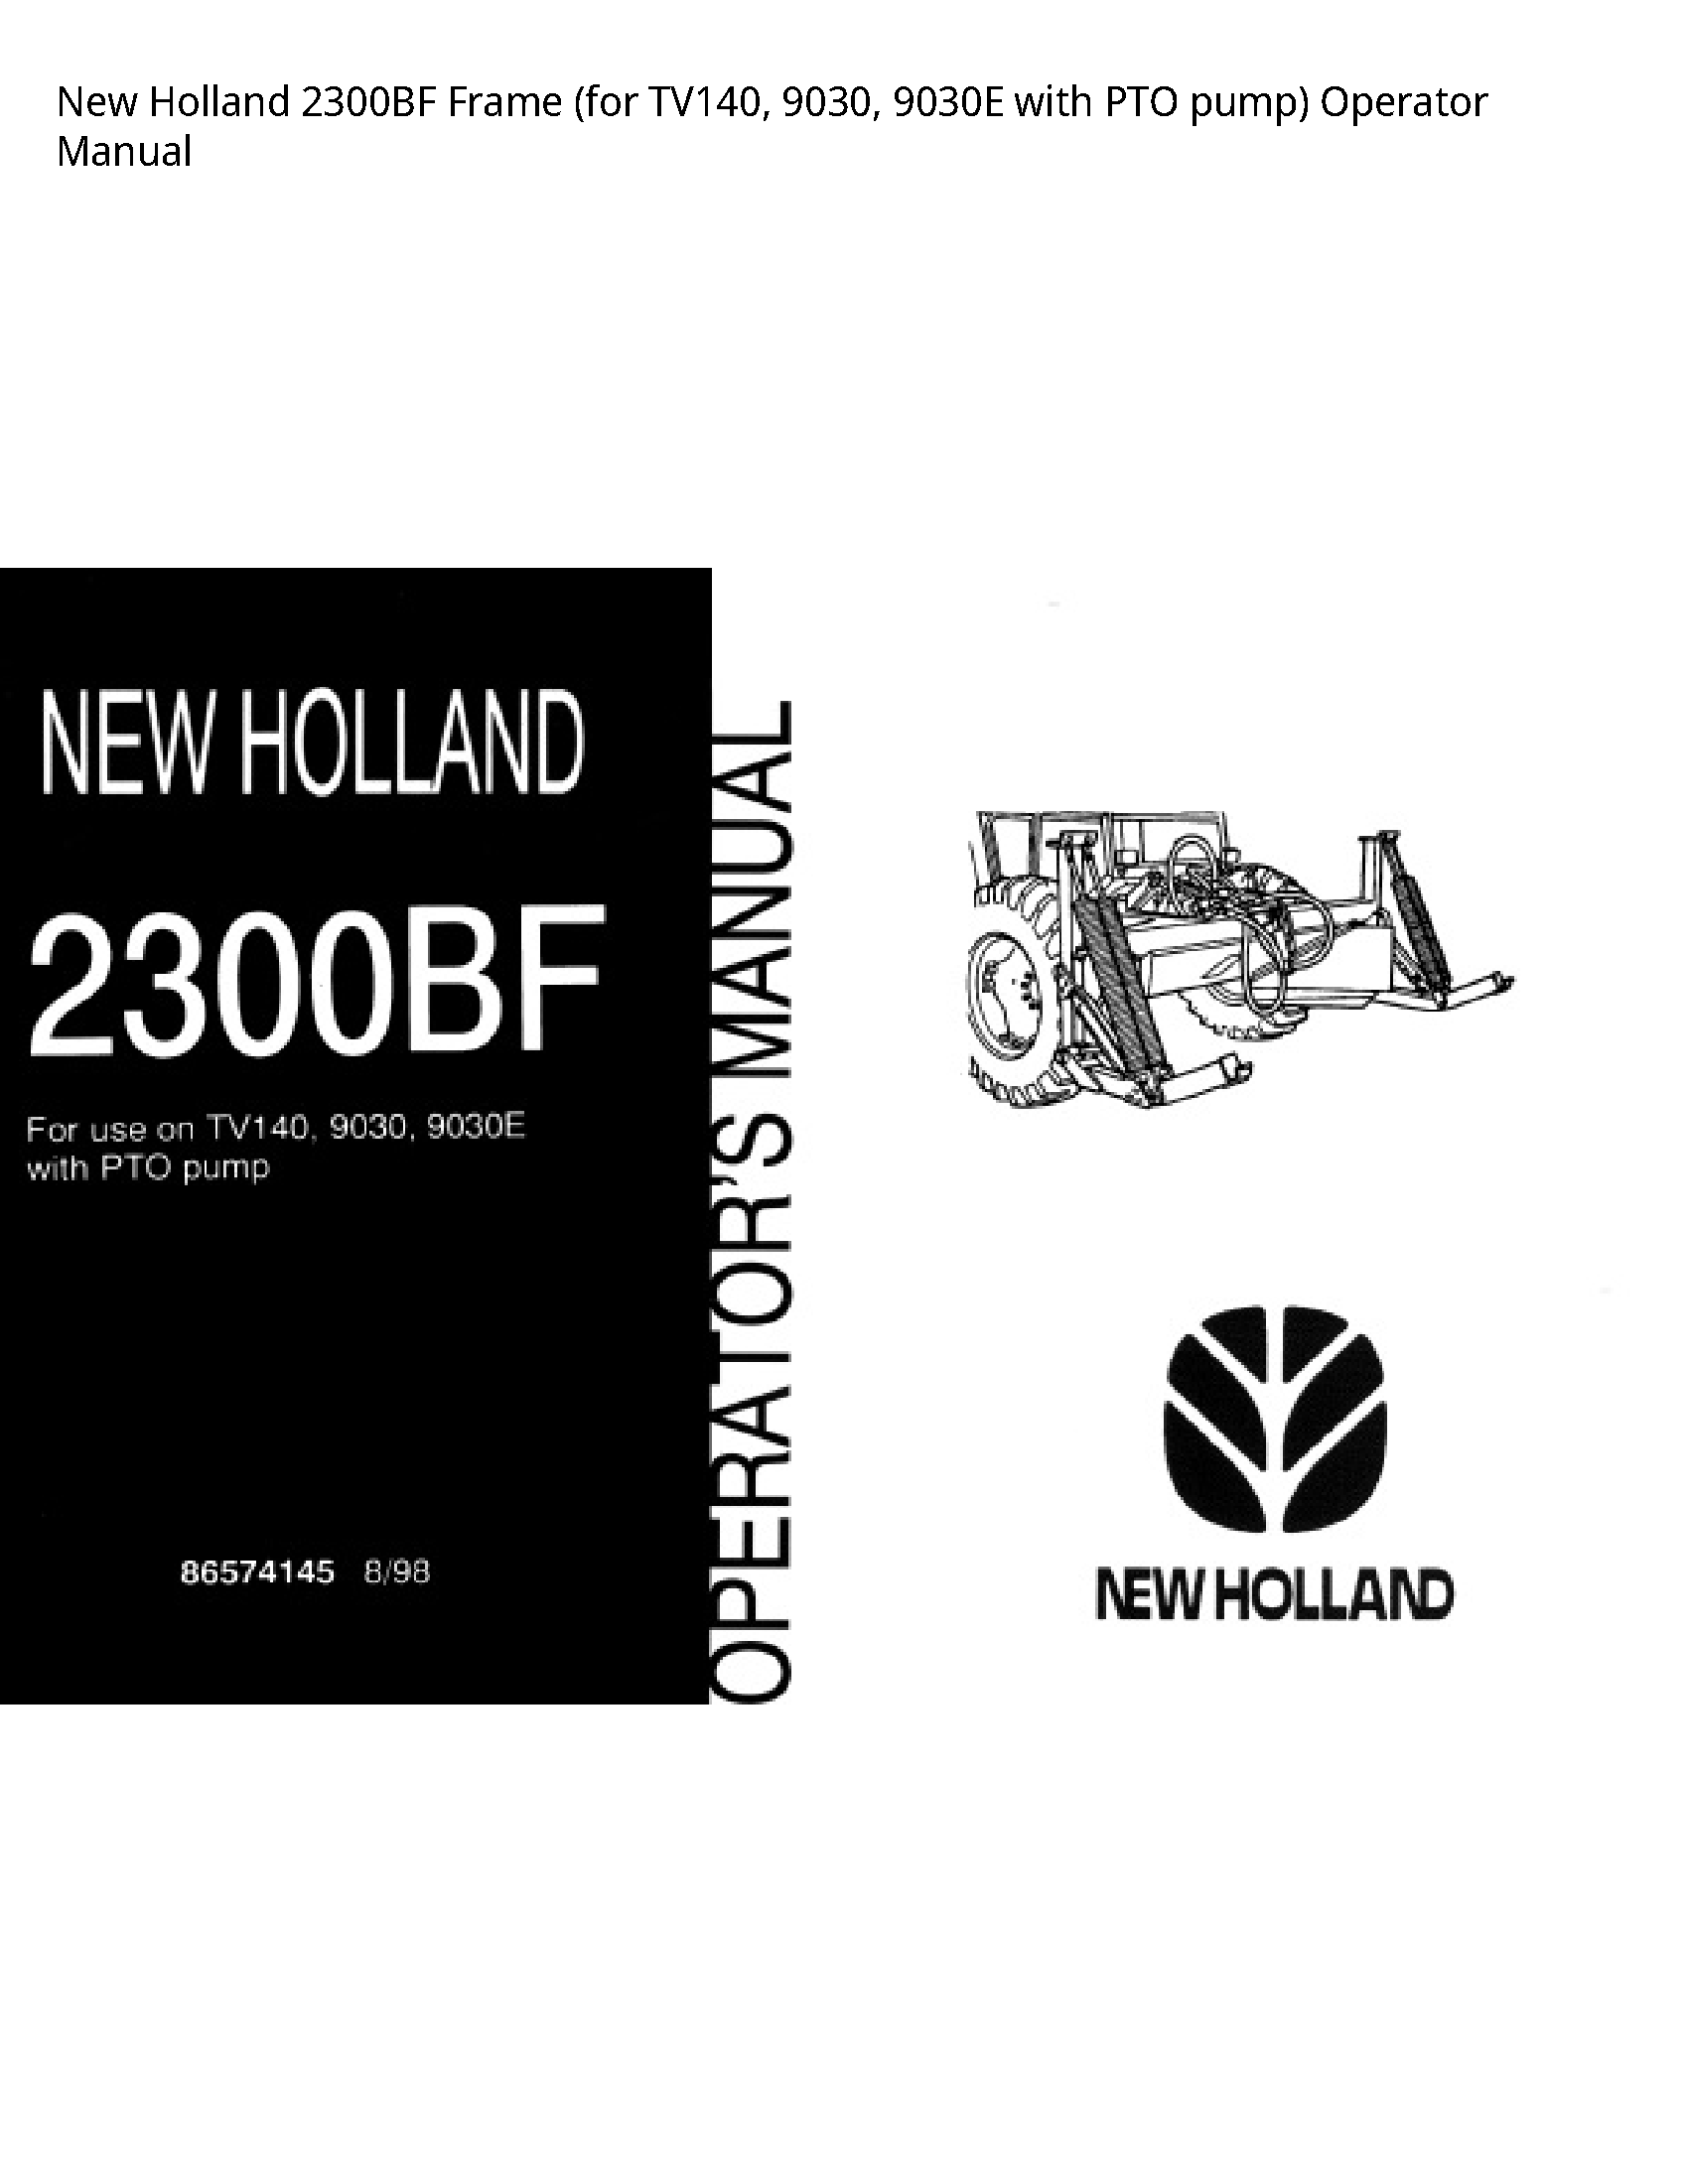 New Holland 2300BF Frame (for with PTO pump) Operator manual